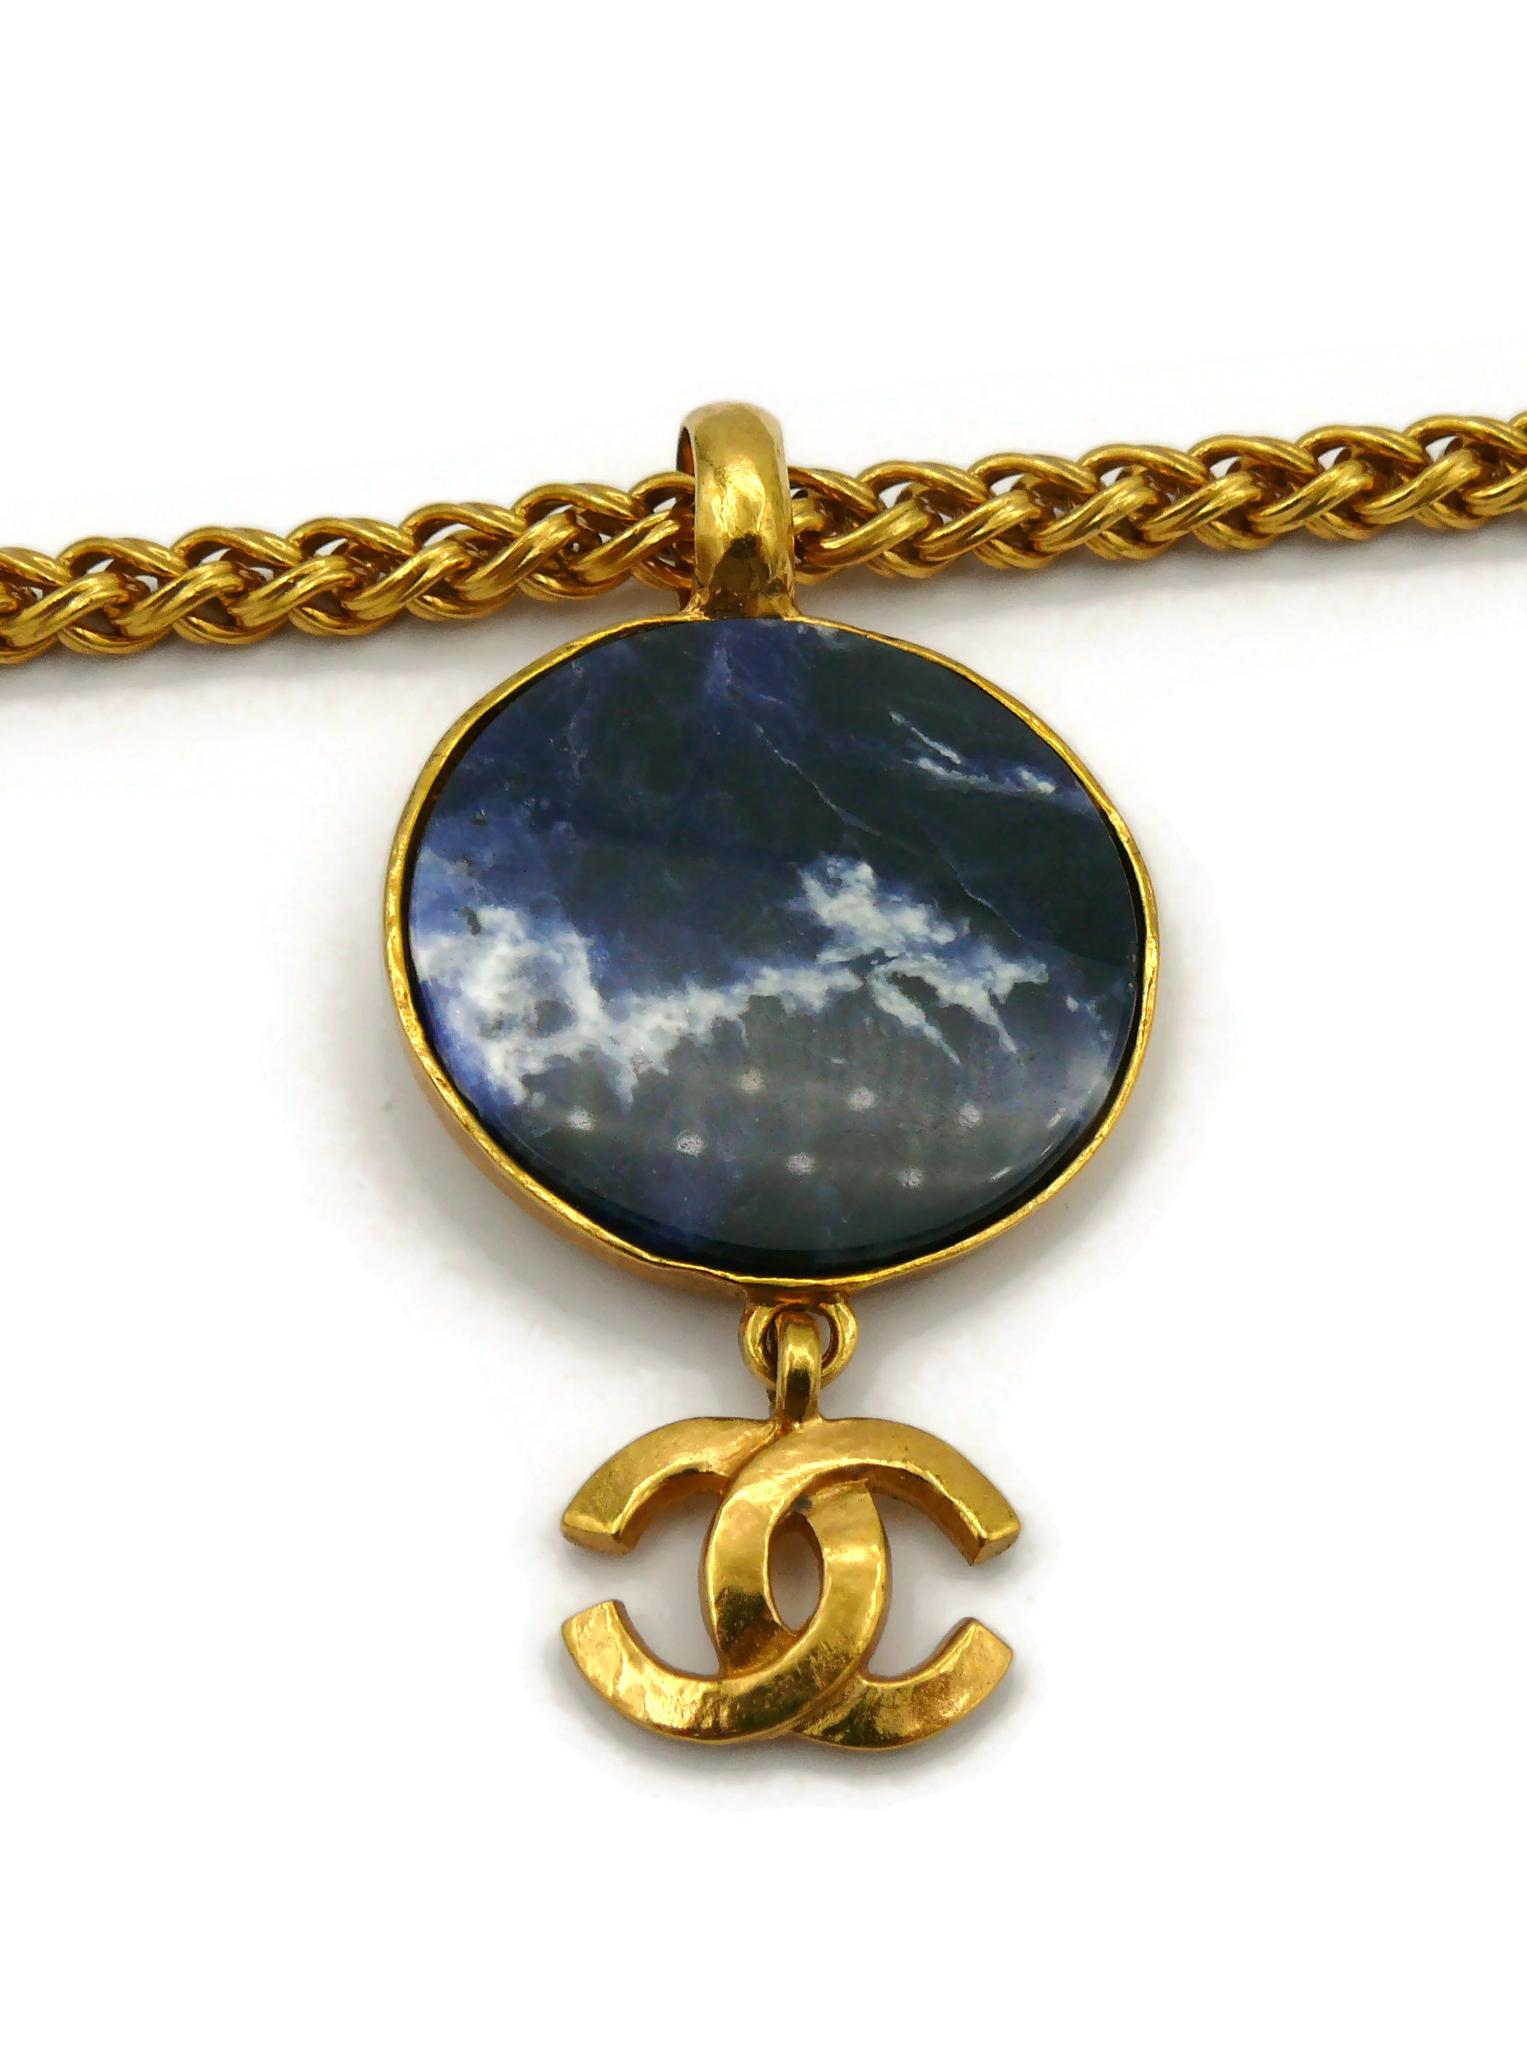 CHANEL by KARL LAGERFELD Vintage Marbled Blue Disc Logo Pendant Necklace, 1995 For Sale 5